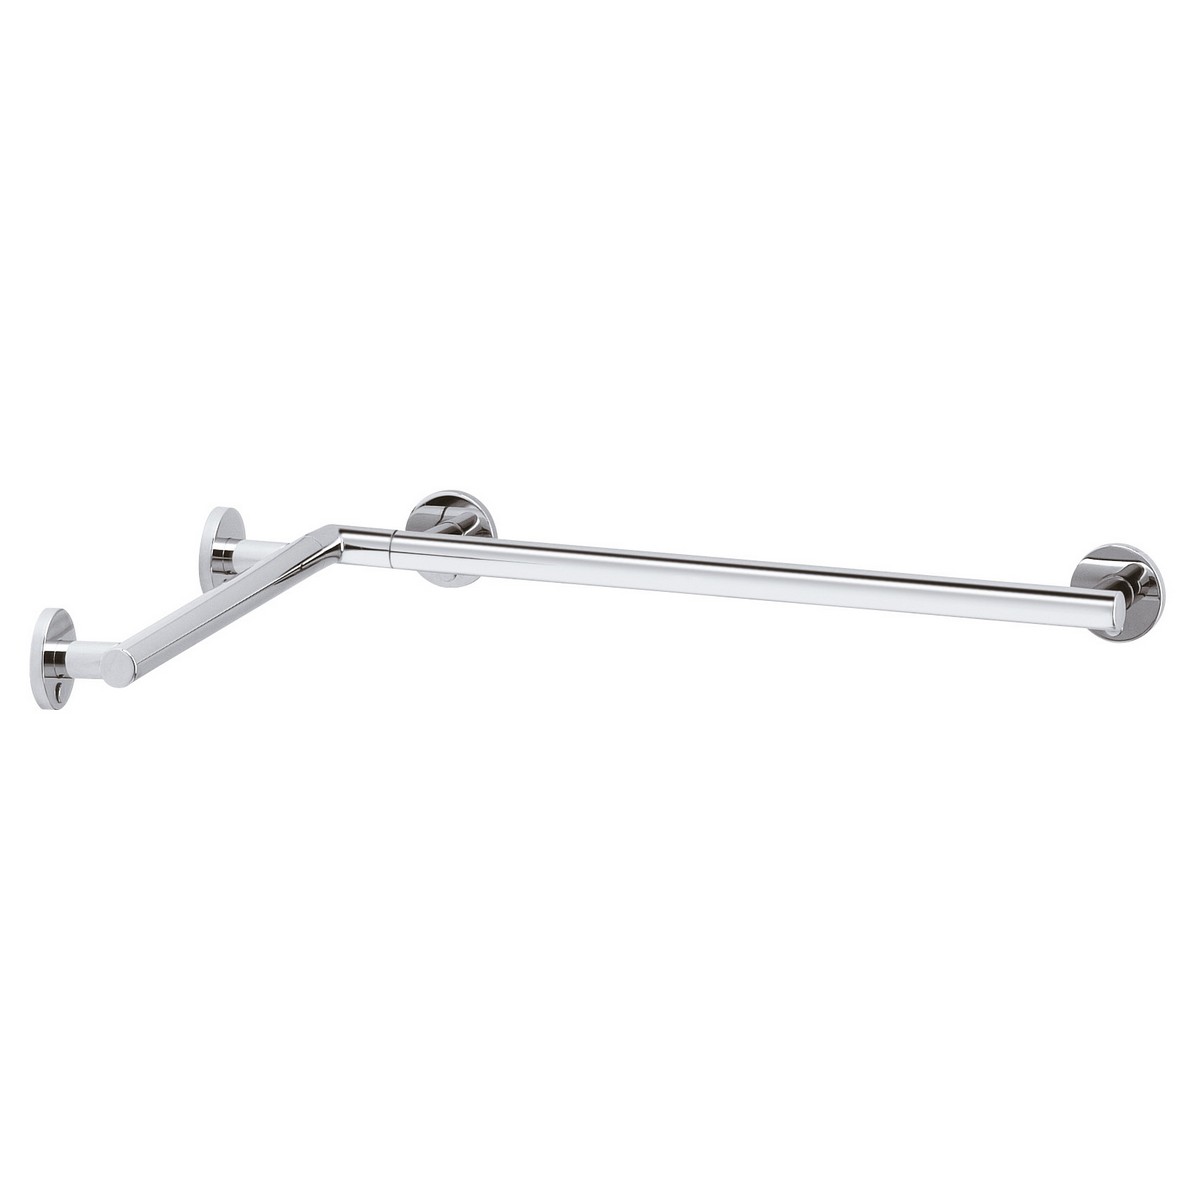 KEUCO 35911012424 PLAN CARE 24 X 24 INCH WALL MOUNTED CORNER GRAB BAR FOR SHOWER/TUB IN POLISHED CHROME